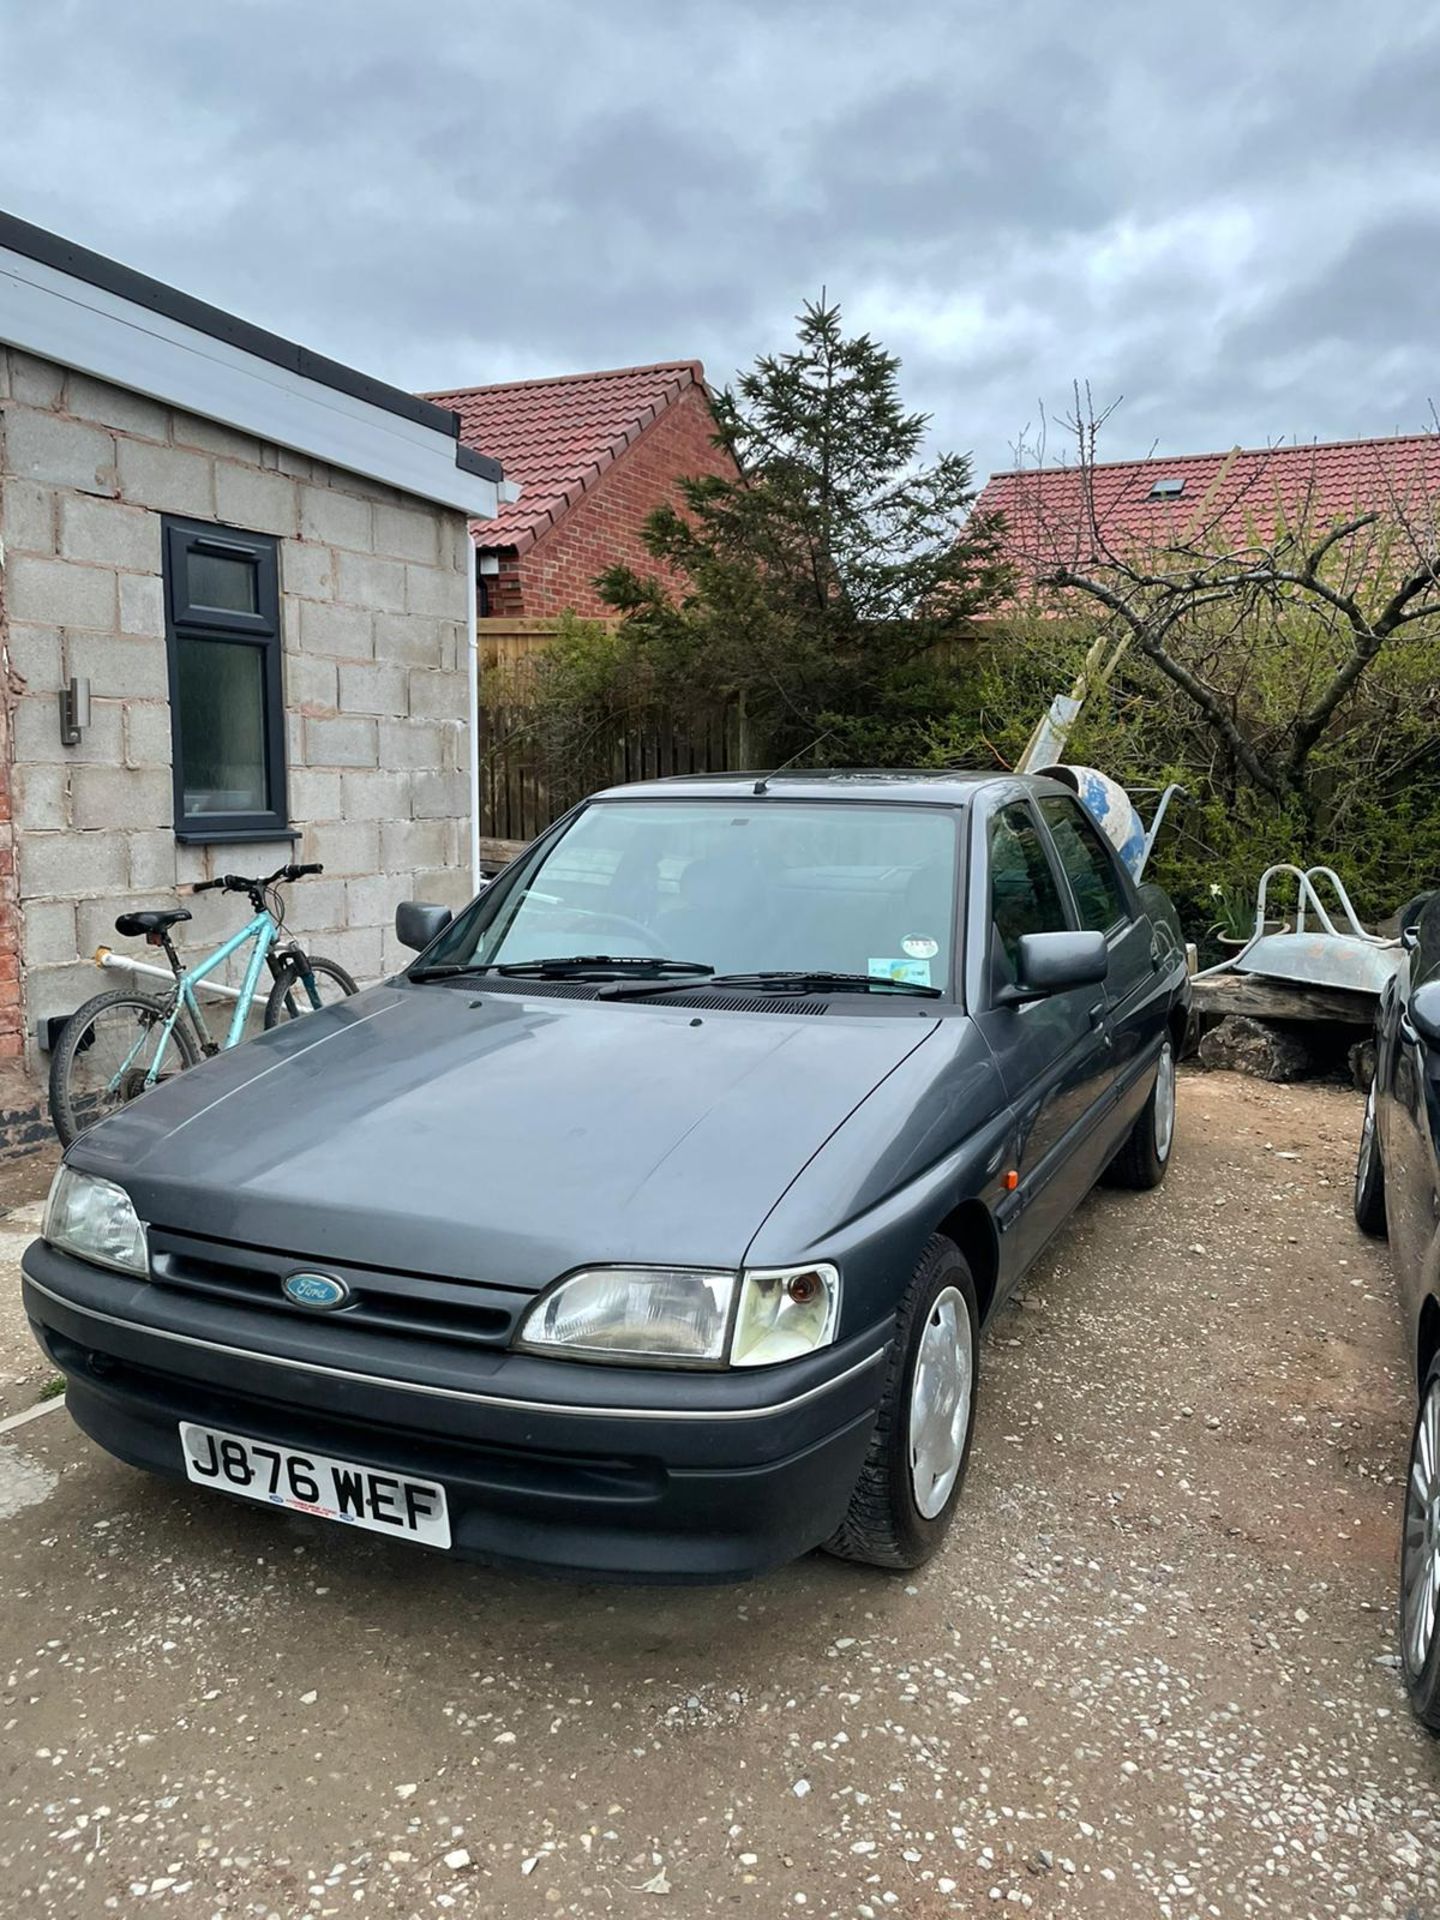 1992 FORD ORION LX AUTO, GREY, PETROL, AUTO VARIABLE 1 GEARS, 4 PREVIOUS KEEPERS, NO VAT - Image 3 of 8